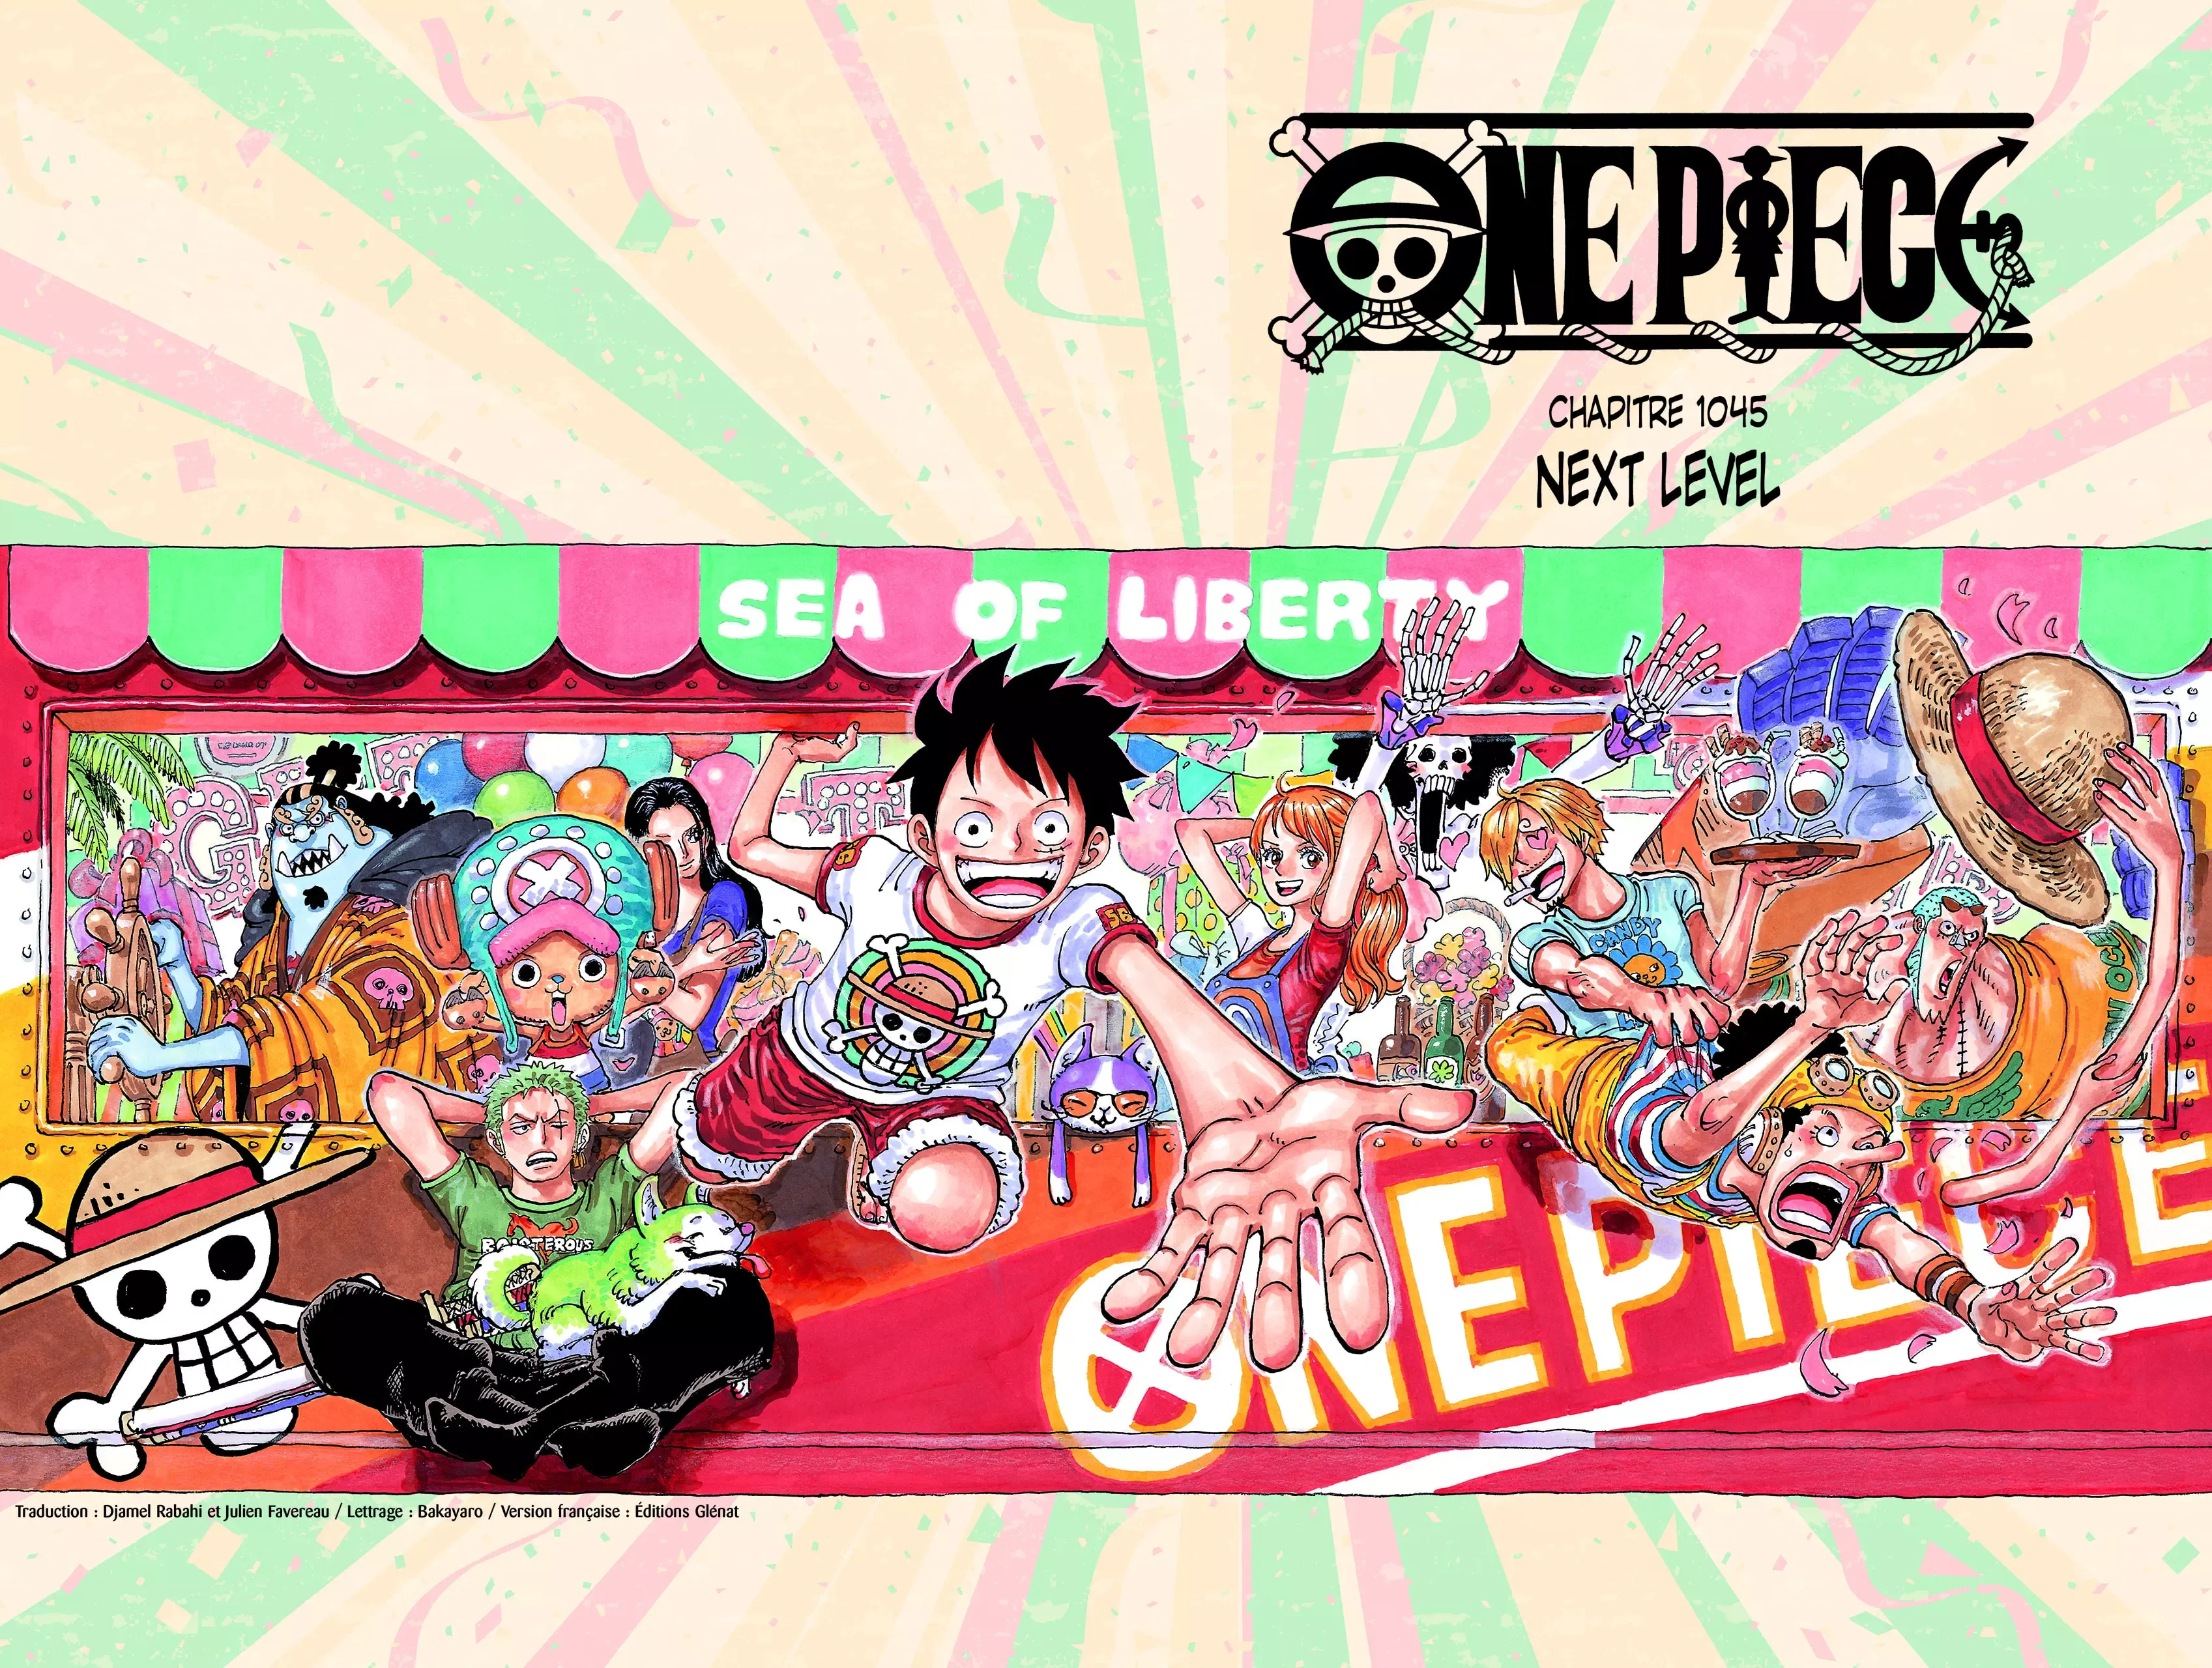 One Piece: Chapter chapitre-1045 - Page 1